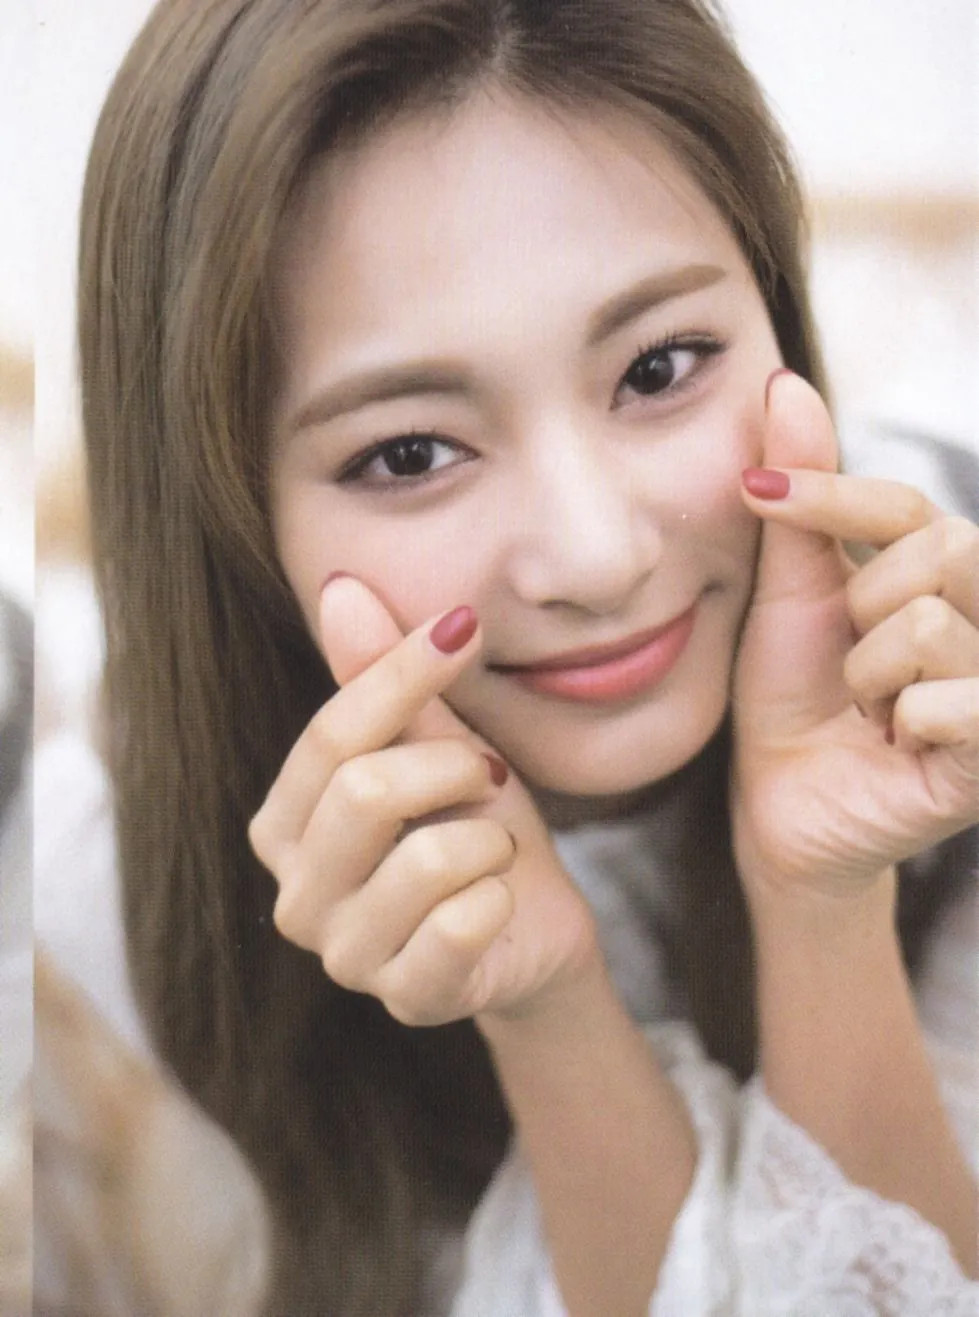 DICON vol.7 TWICE You only live ONCE - Tzuyu Minibook [SCANS] | kpopping